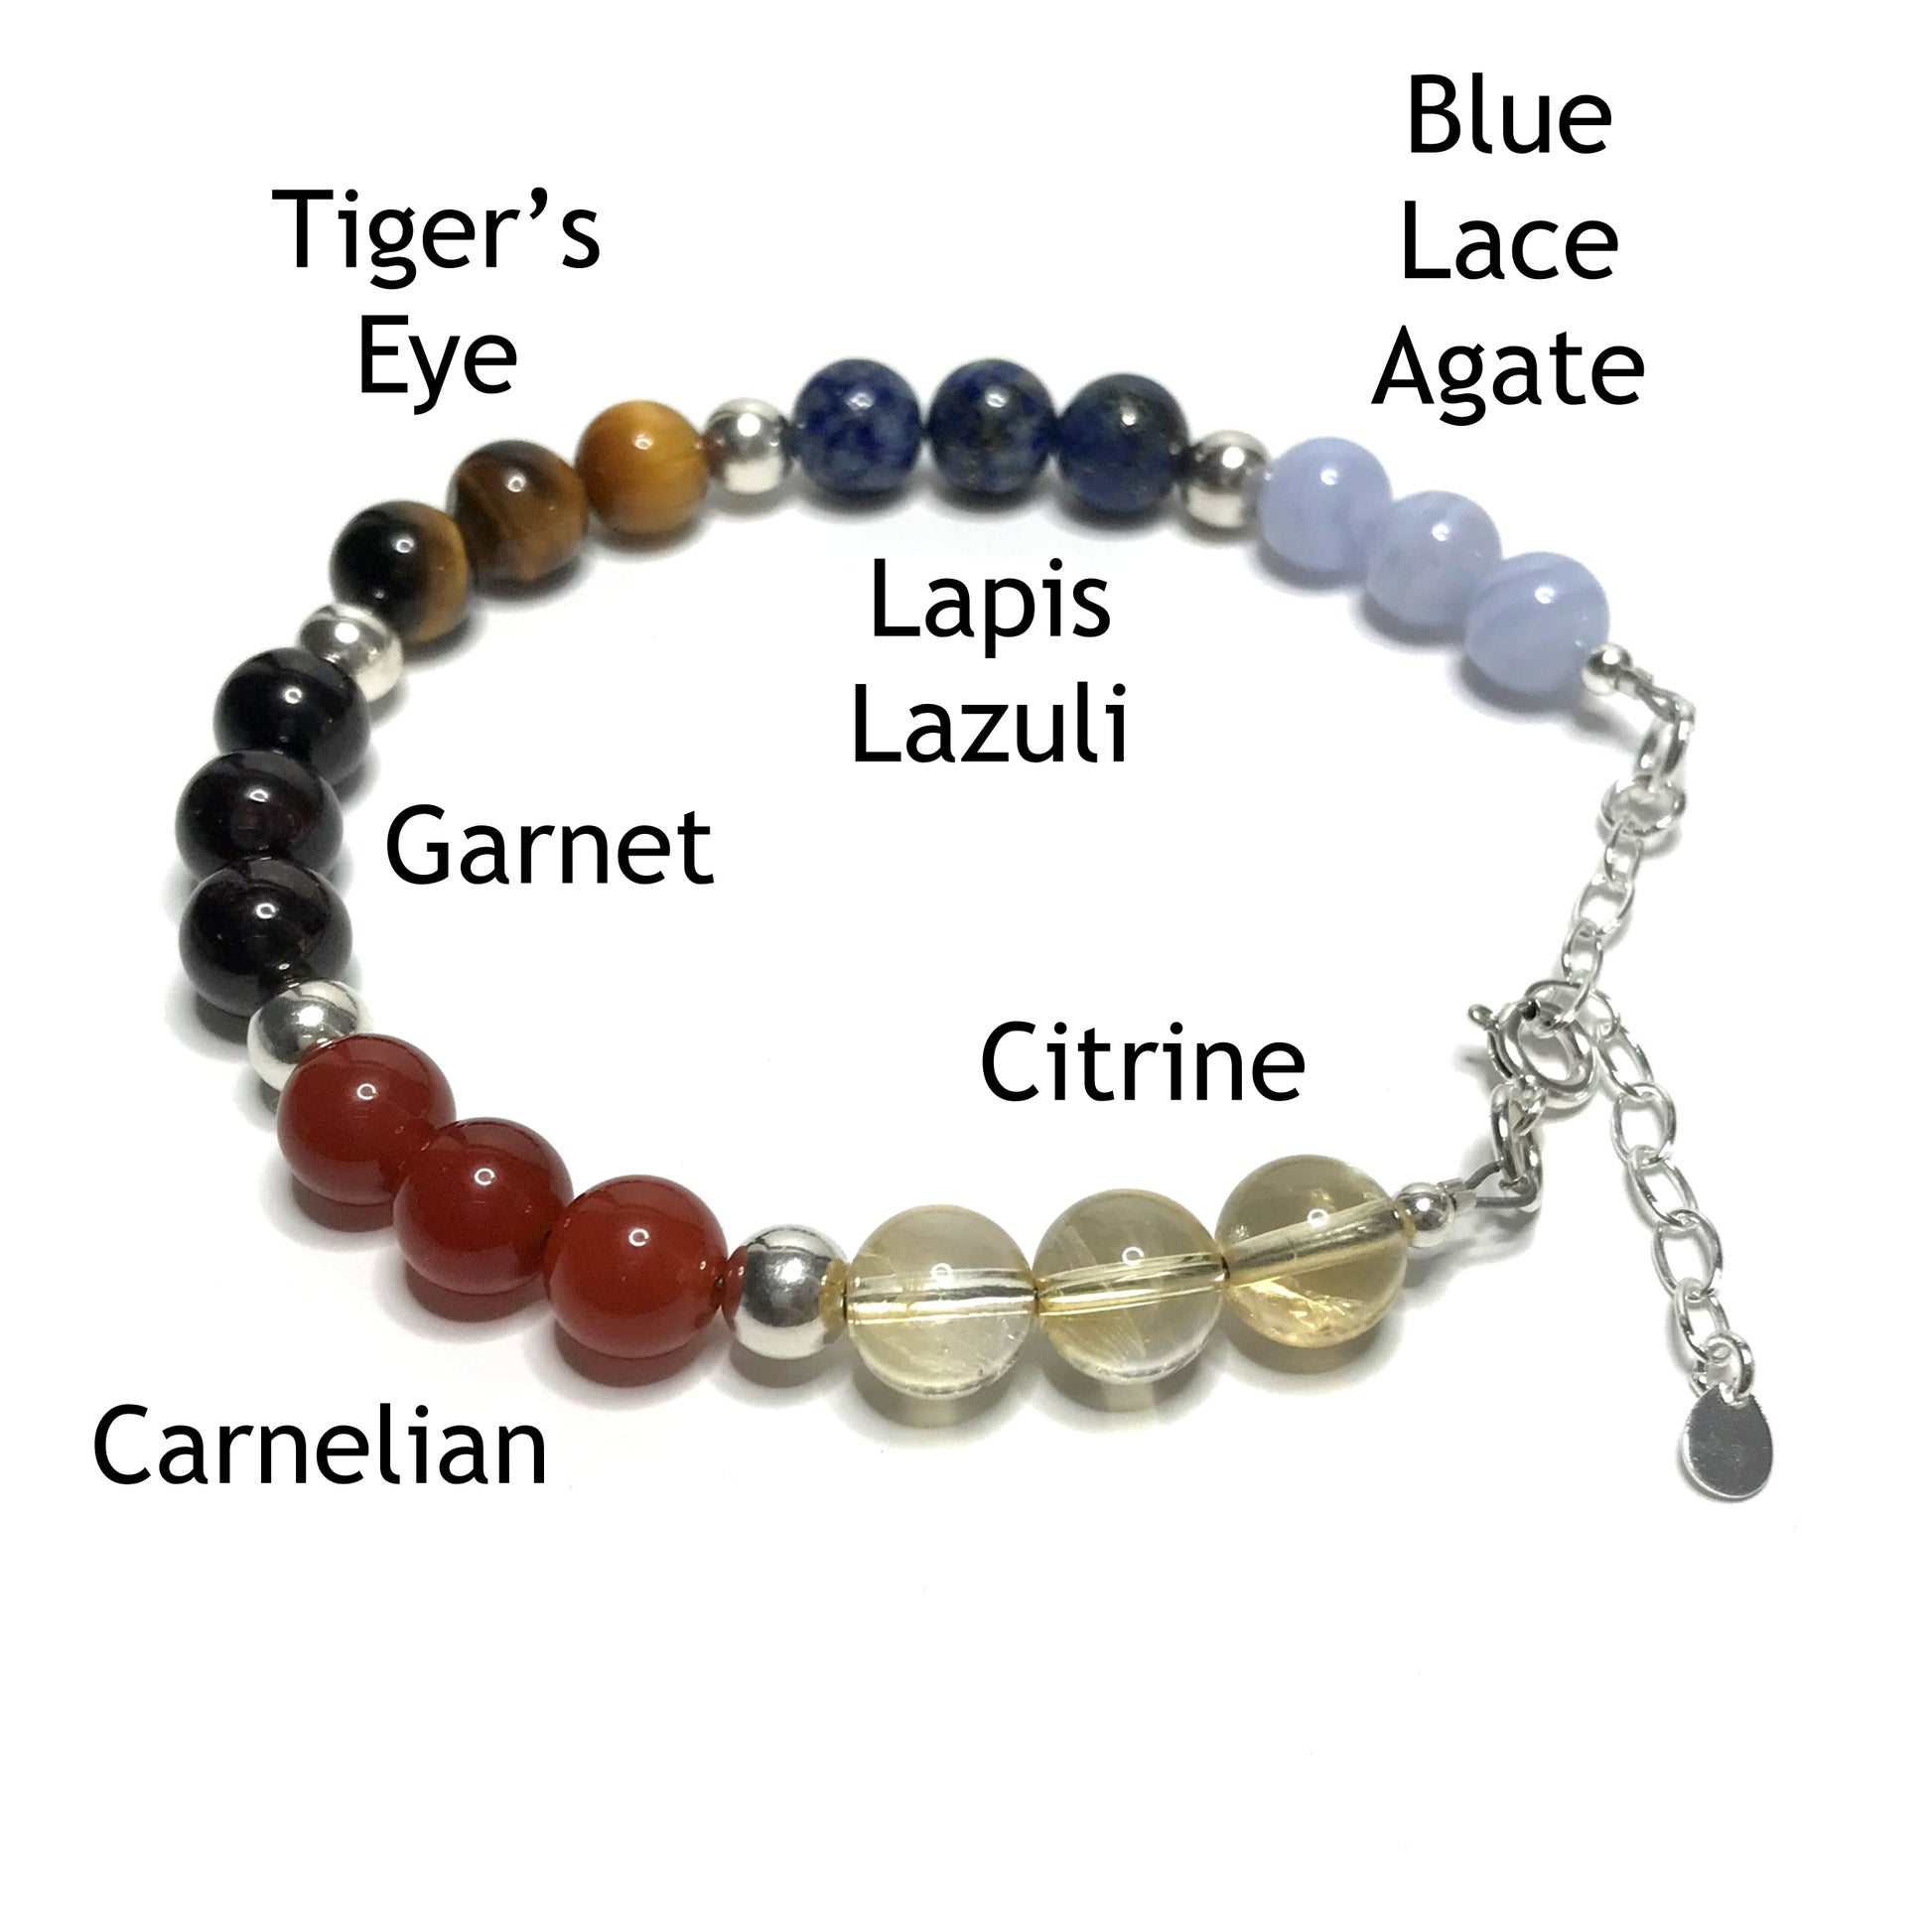 Creativity bracelet with the beads labelled as blue lace agate, lapis lazuli, tiger's eye, garnet, carnelian and citrine